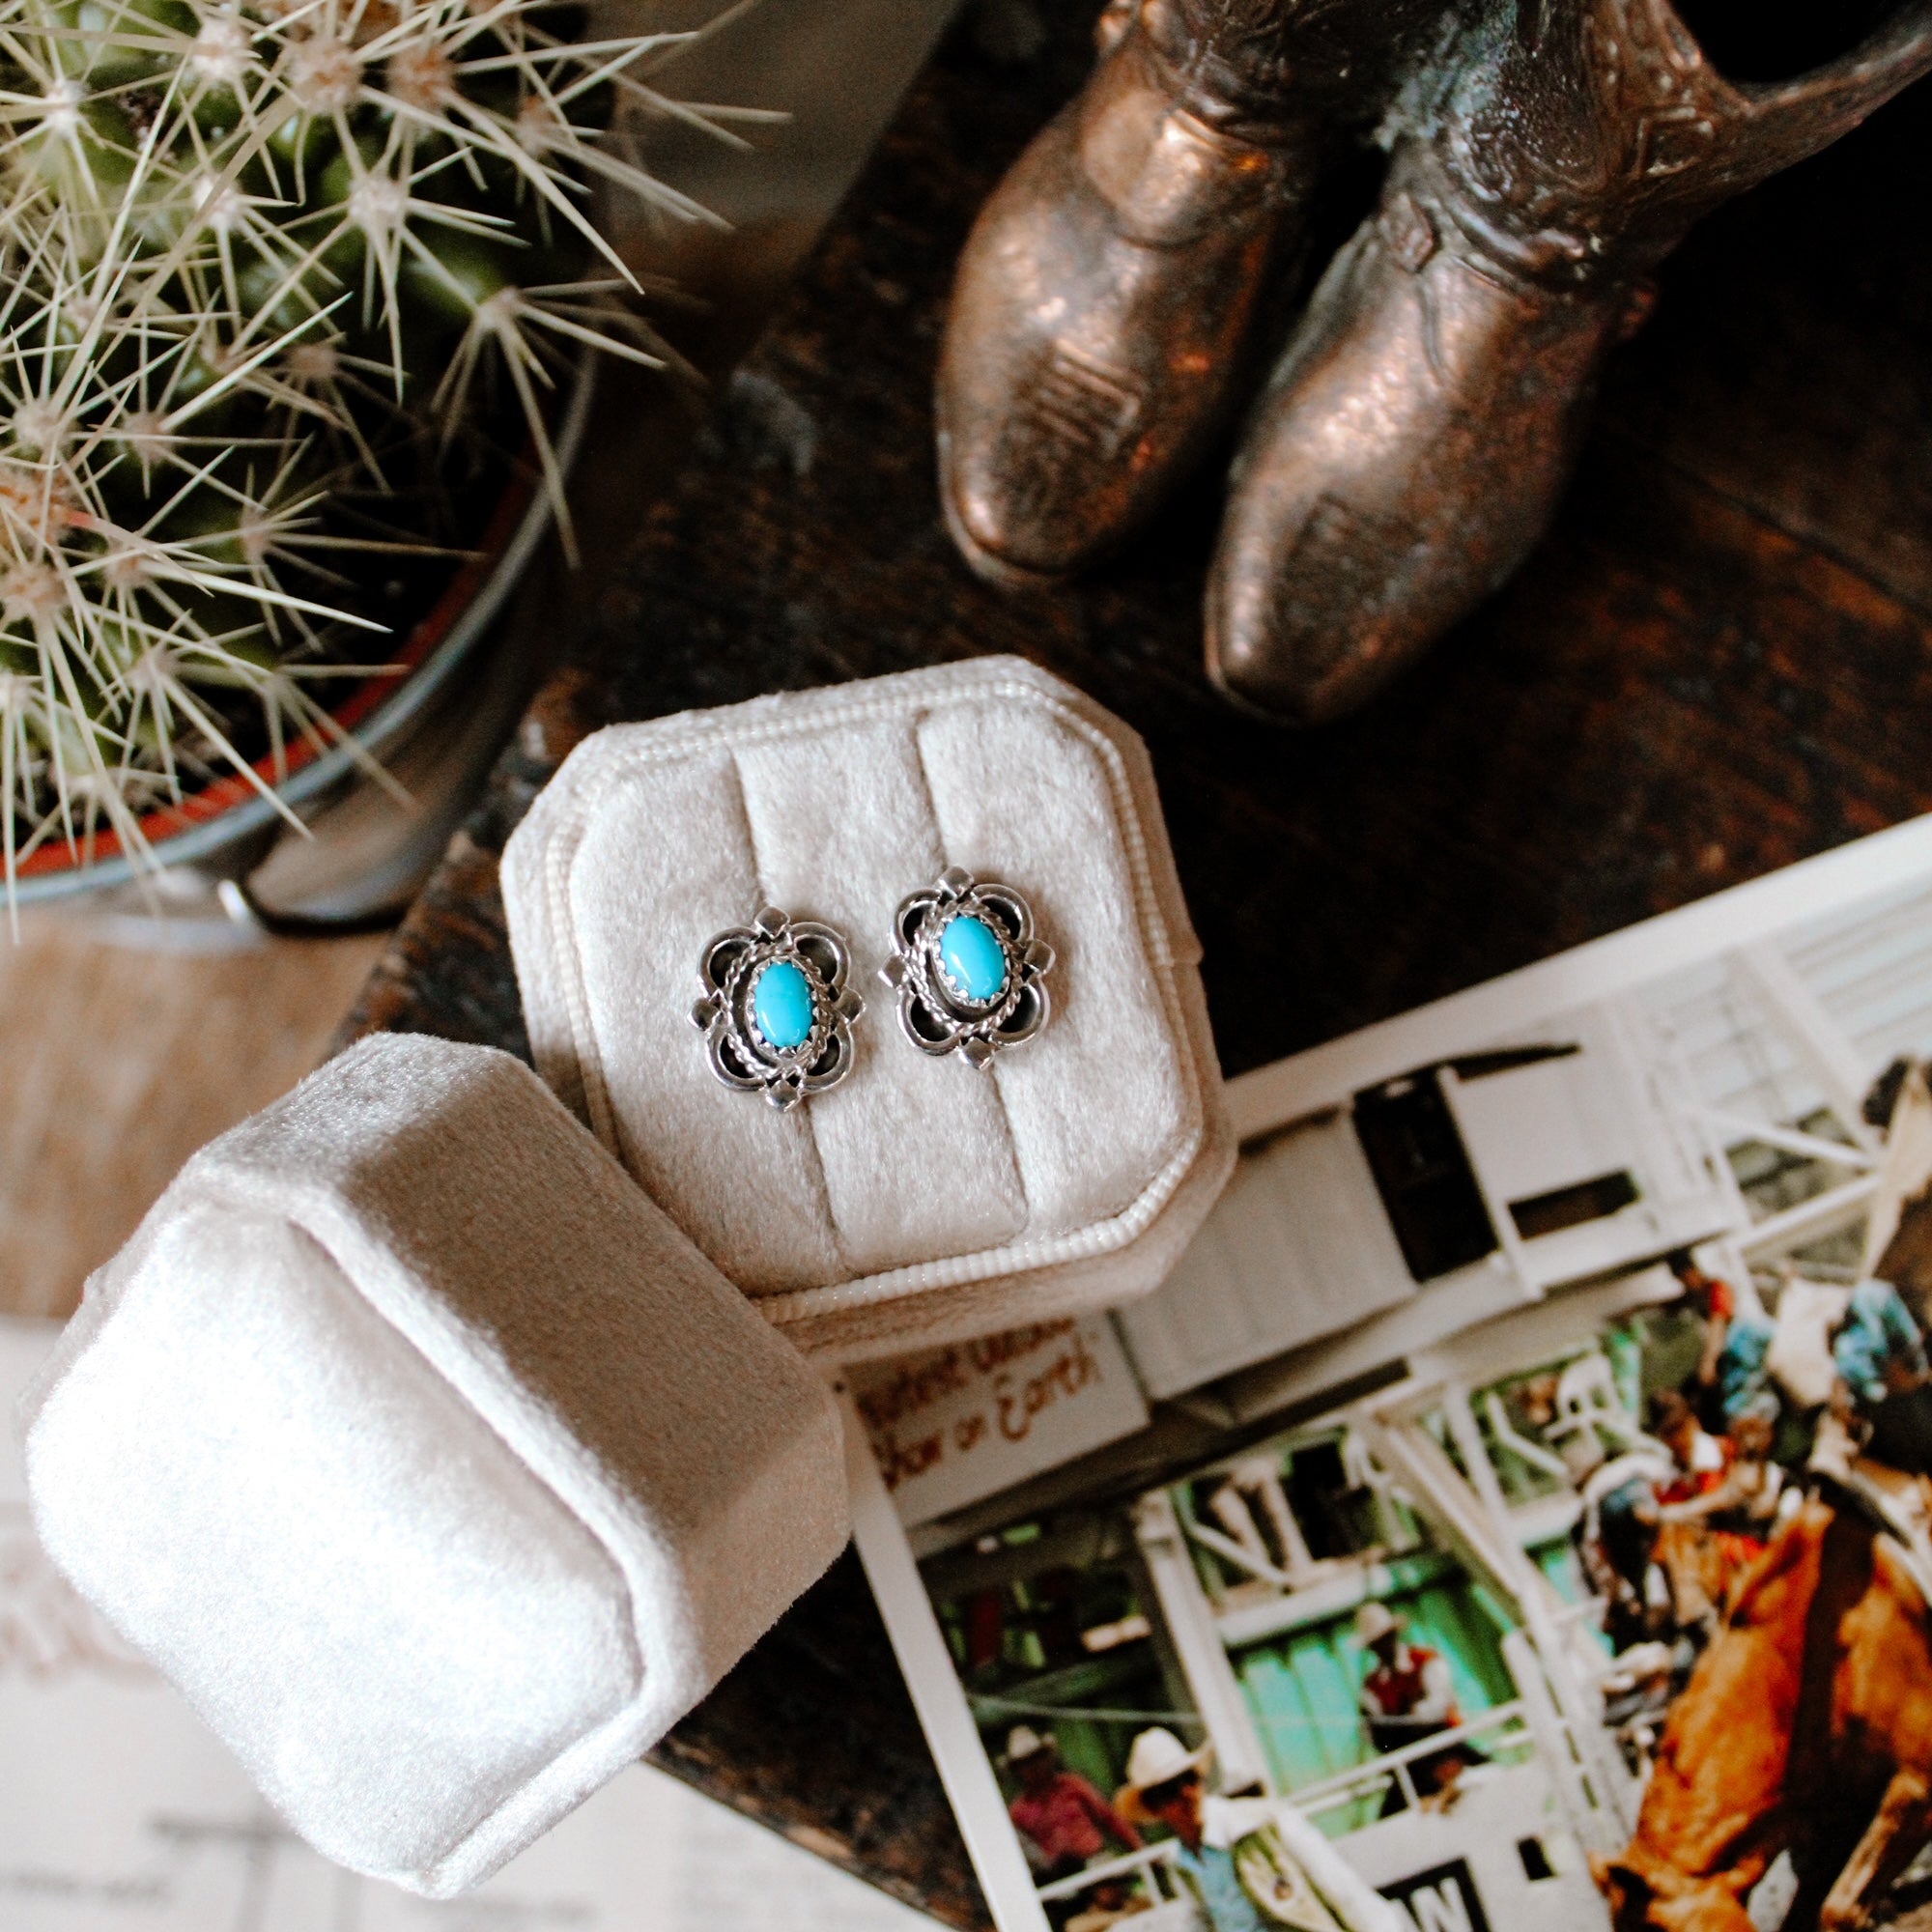 The Turquoise Buckle – Western Vogue Boutique